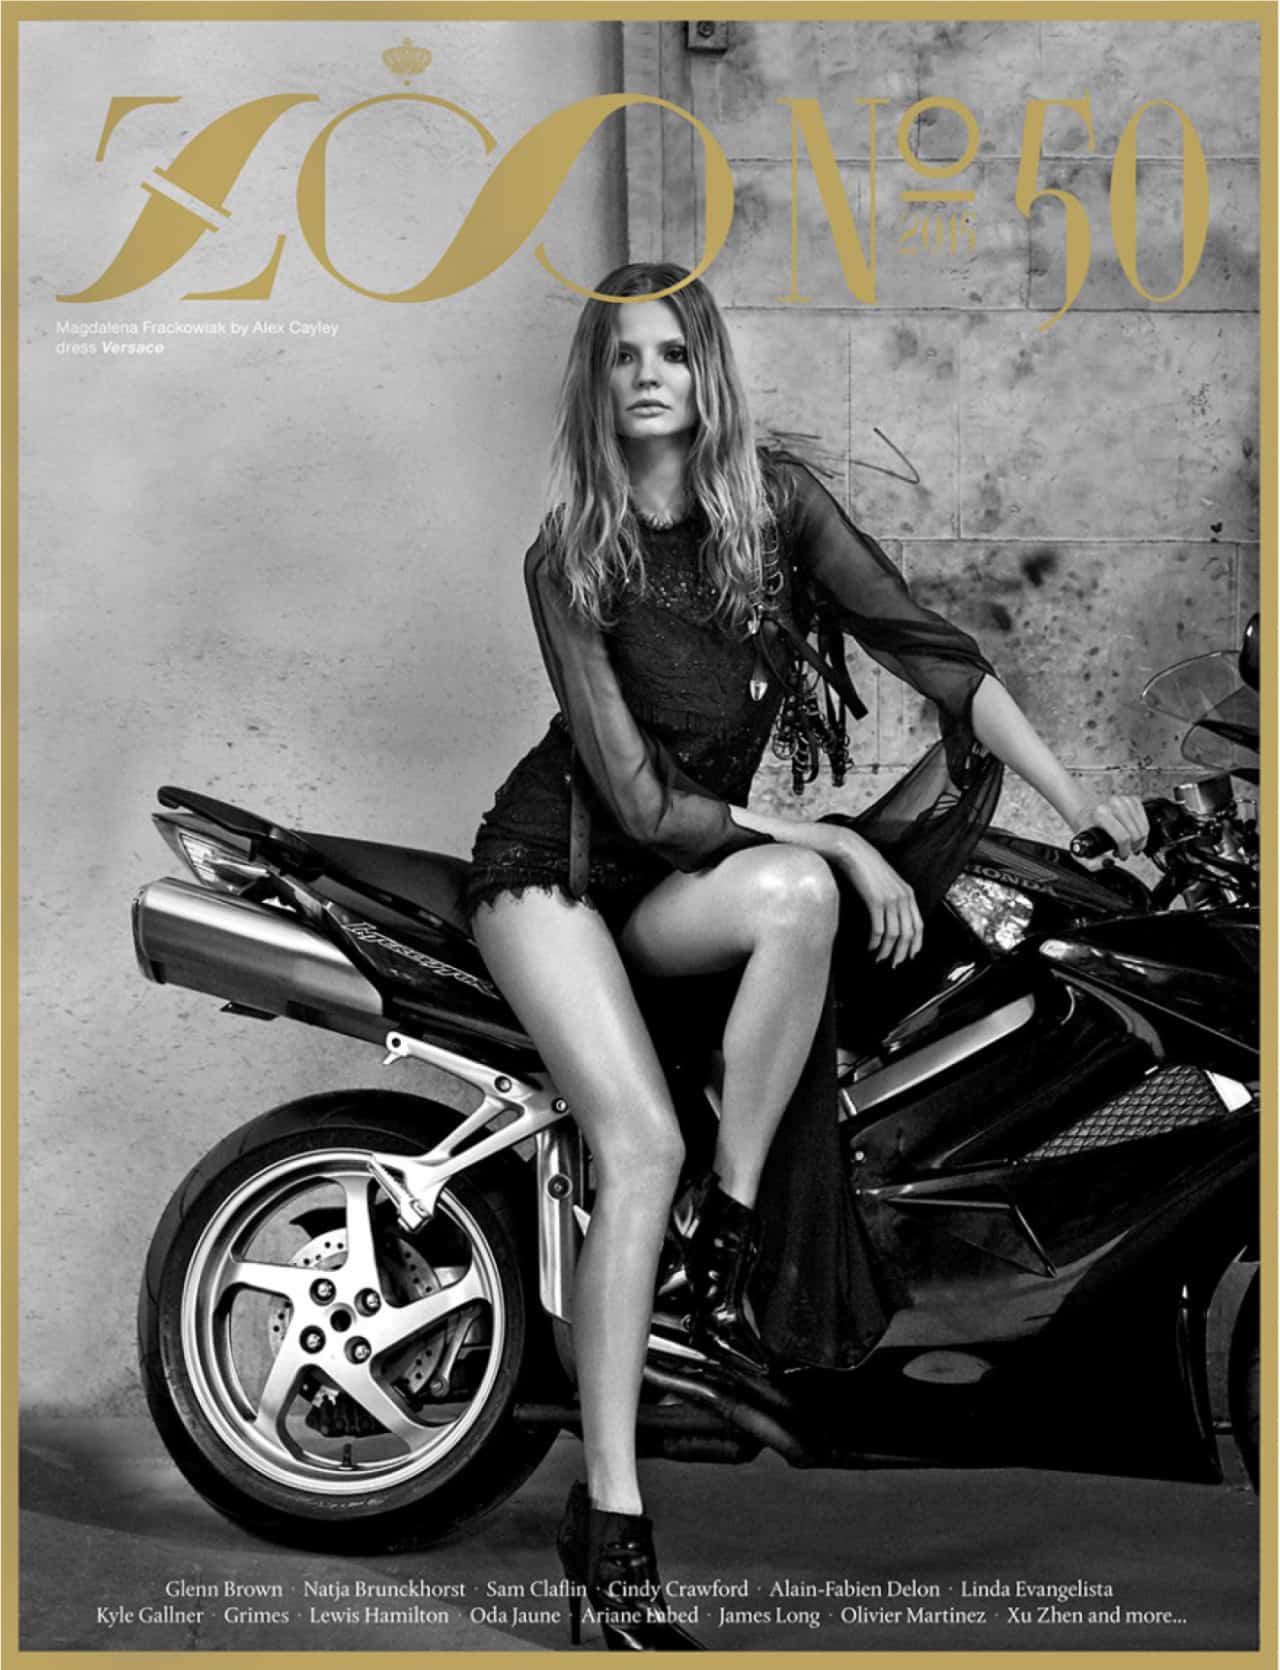 Cover of 50th Issue ZOO Magazine (Spring 2016) with Magdalena Frackowiak by Alex Cayley